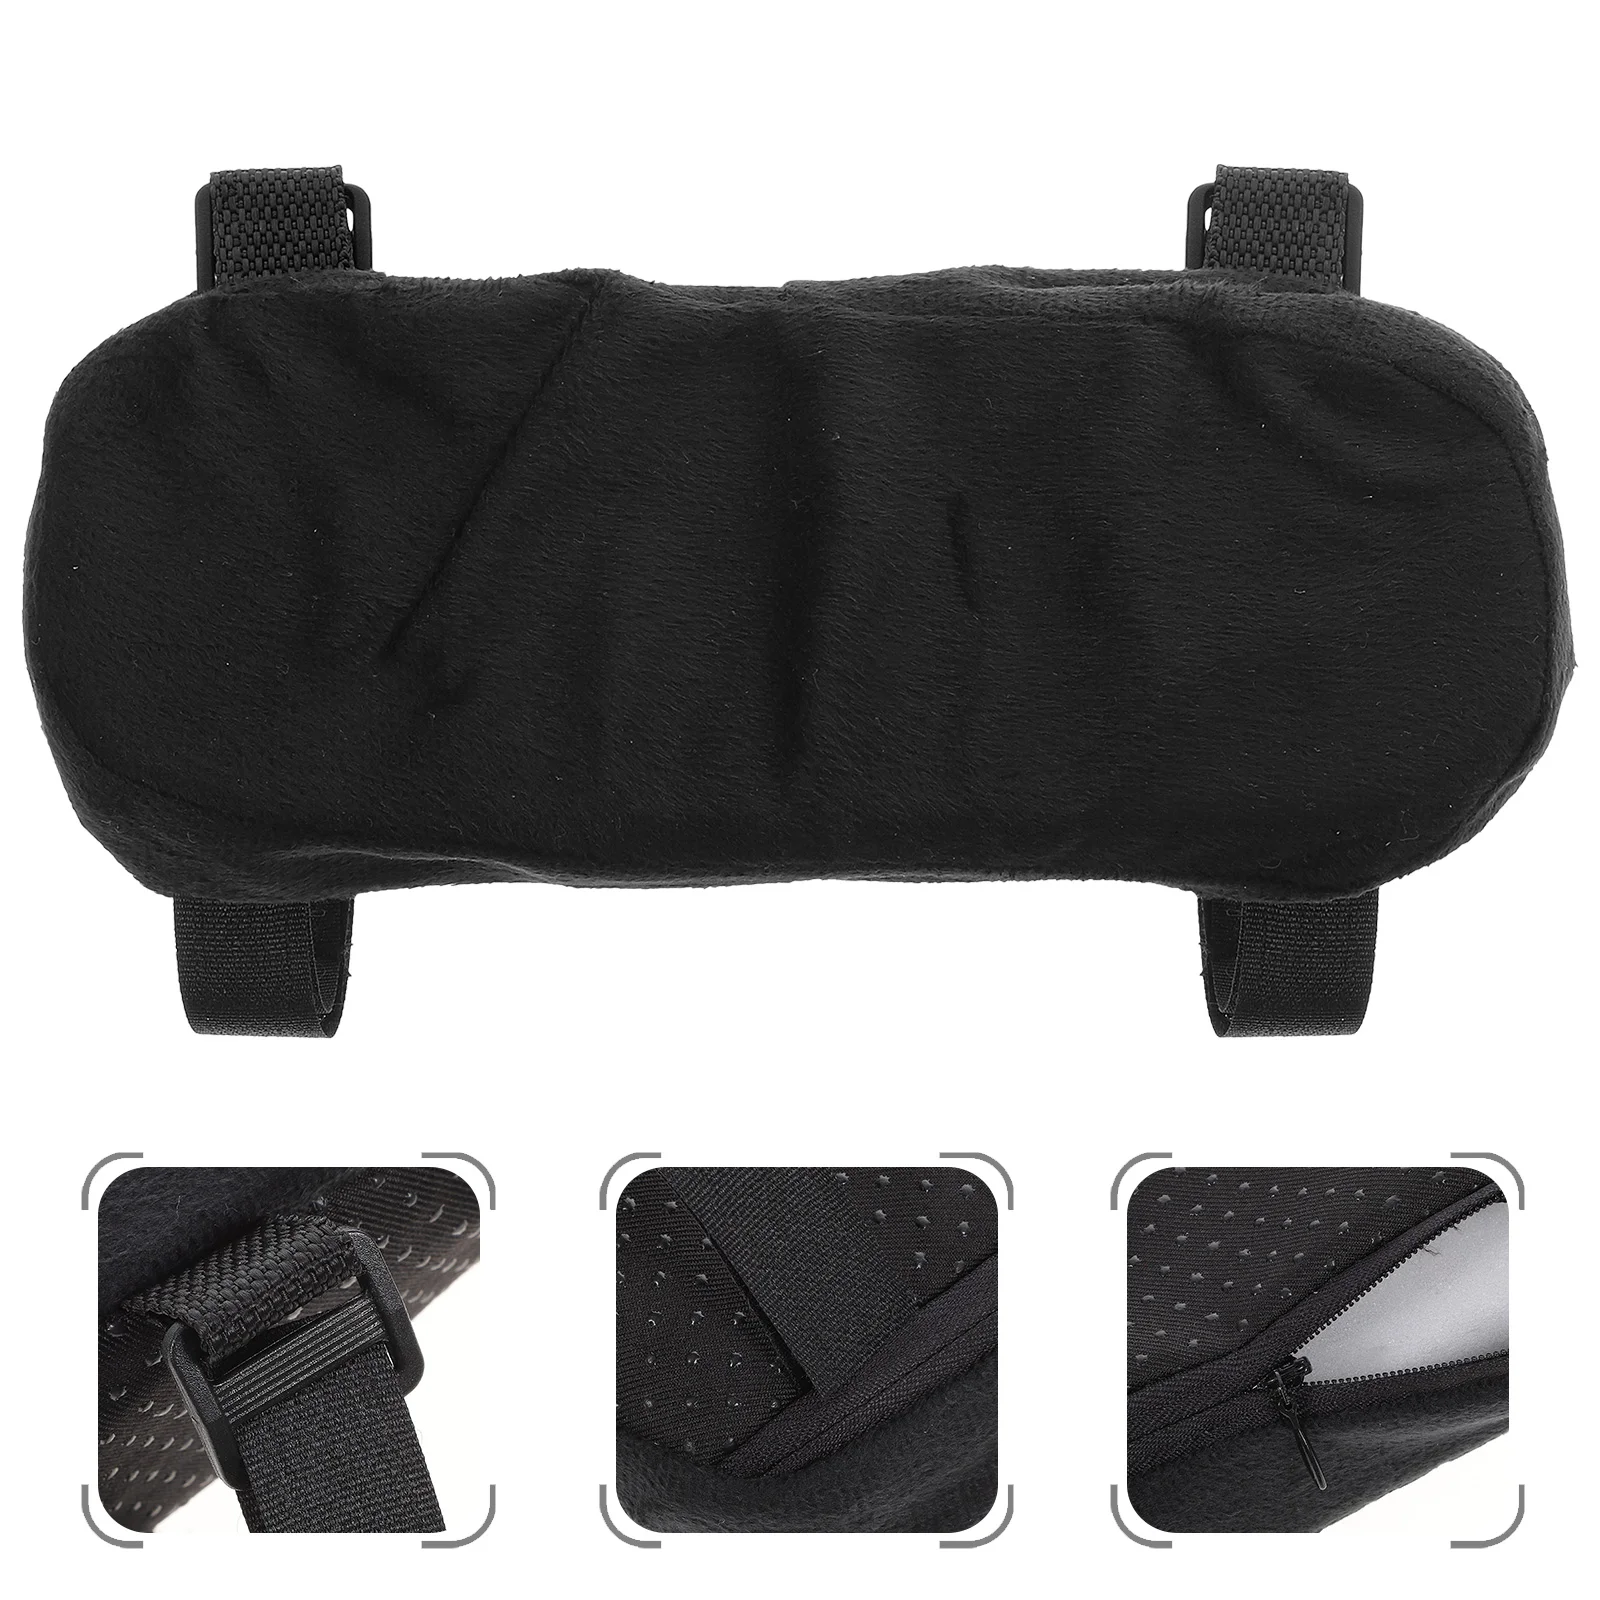 

1 Pair of Rebounded Armrest Pads Comfortable Chair Elbow Pad Armrest Cushions Supple Arm Rests